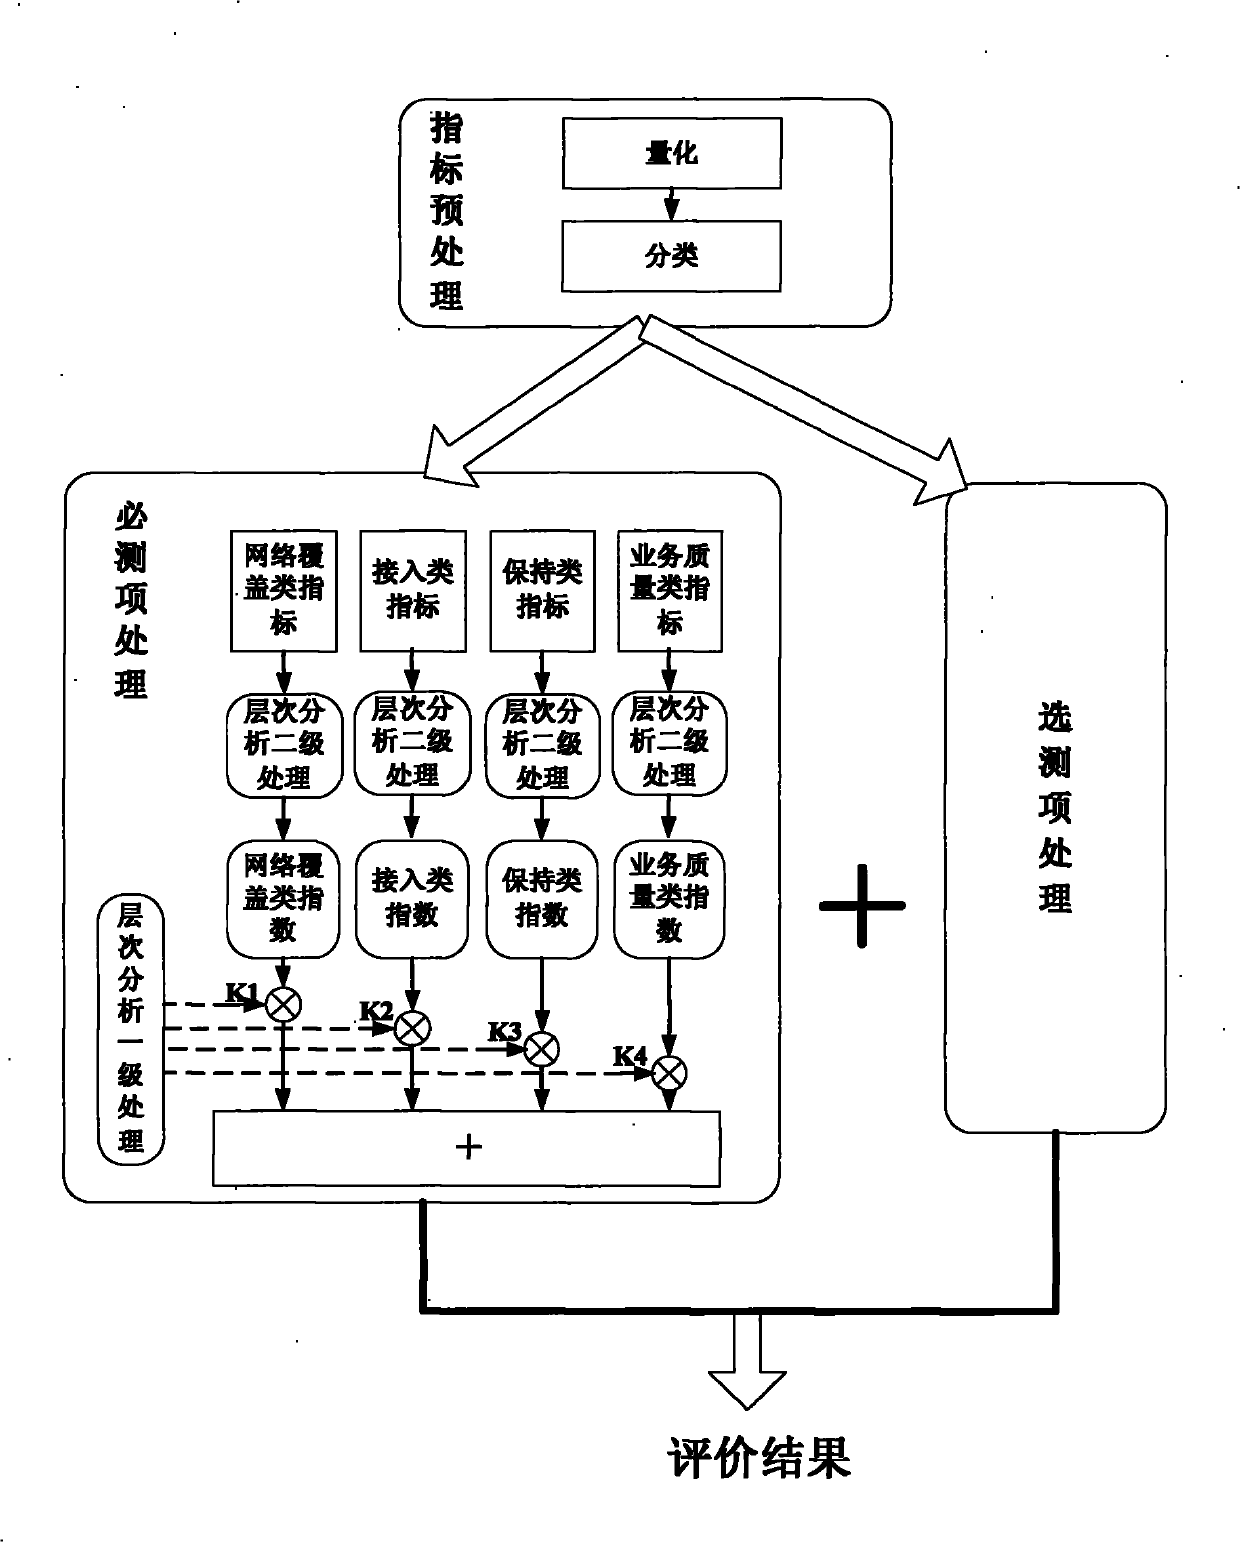 Mobile network communication quality evaluation method based on analytic hierarchy process